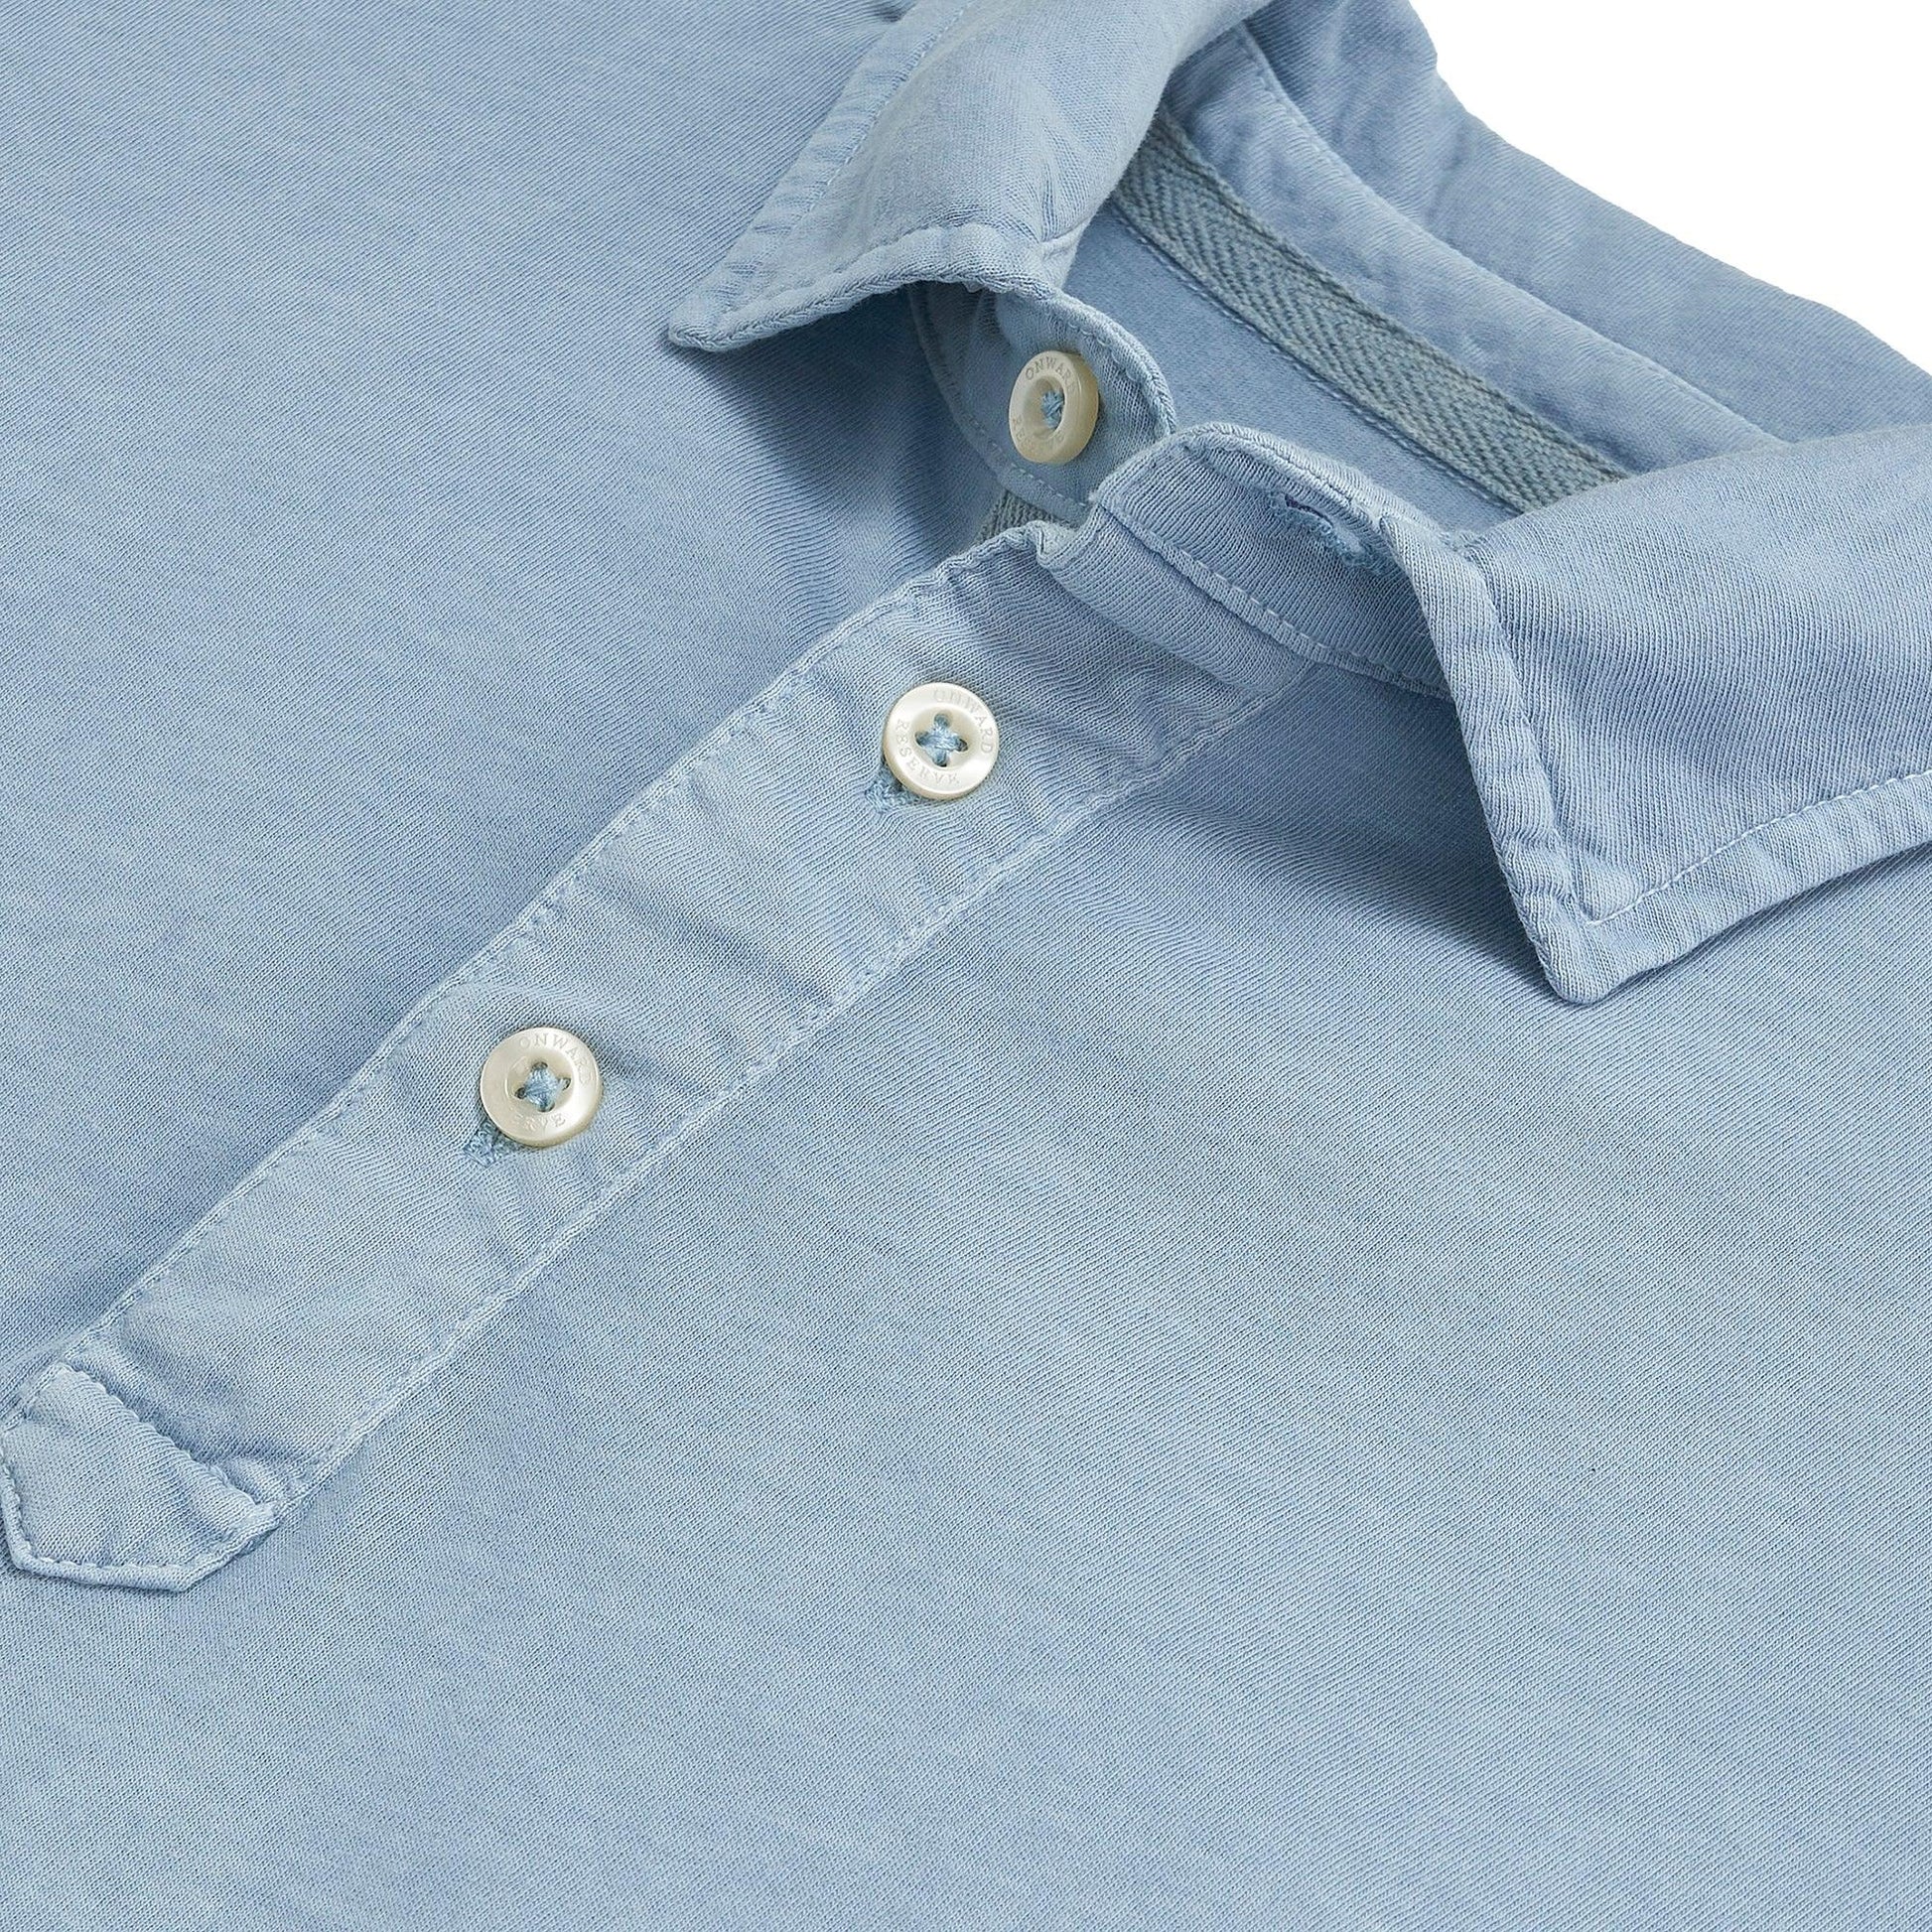 Perry Short Sleeve Polo - Onward Reserve